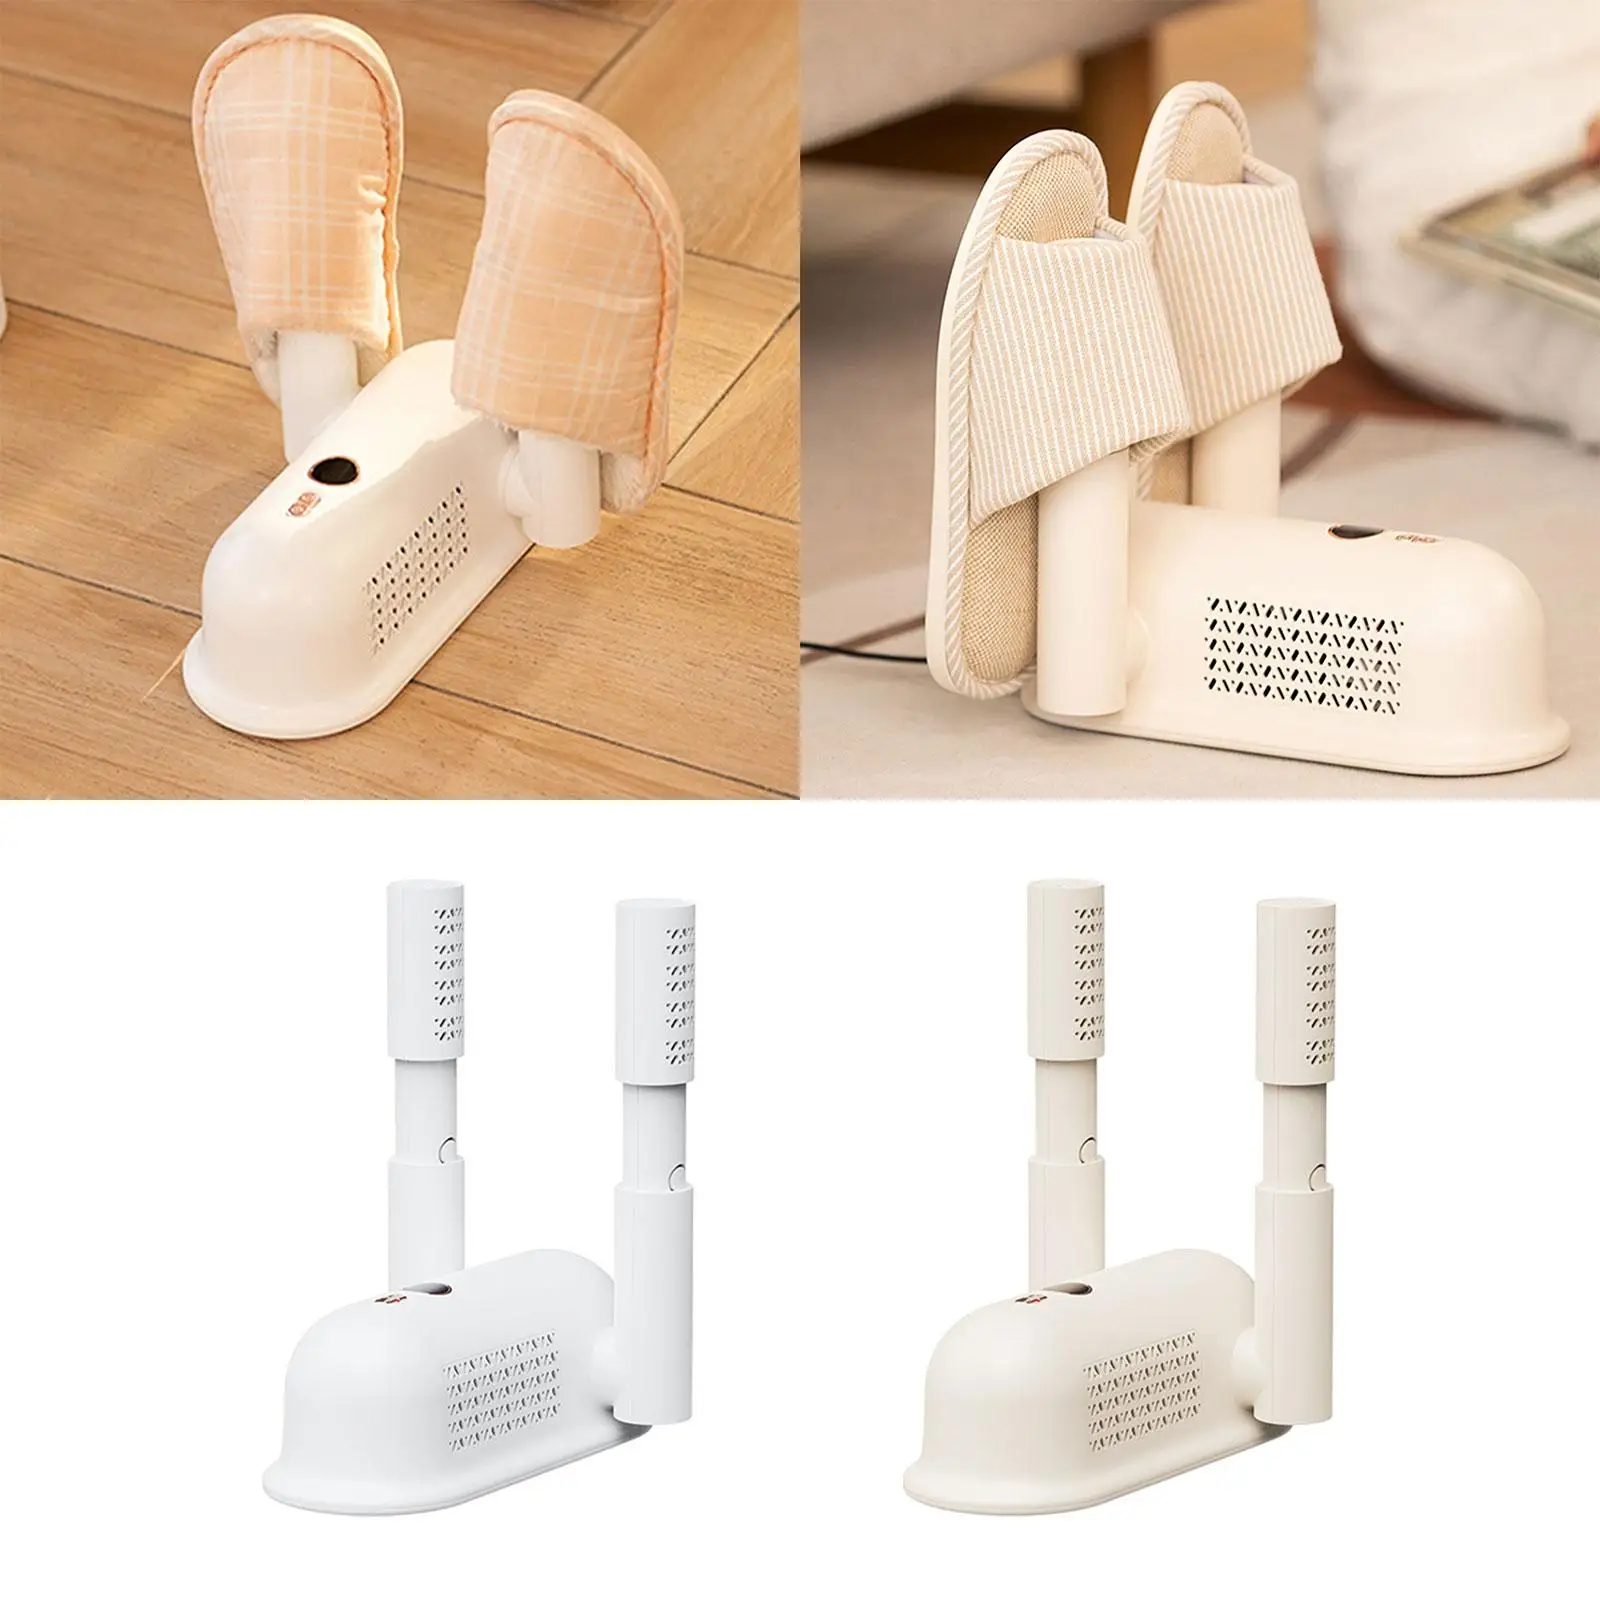 Household Shoe Dryer Heater Quick Drying Portable Glove Dryer Shoes Warmer Boot Dryer for Socks Winter Dormitory Snow Boots Home